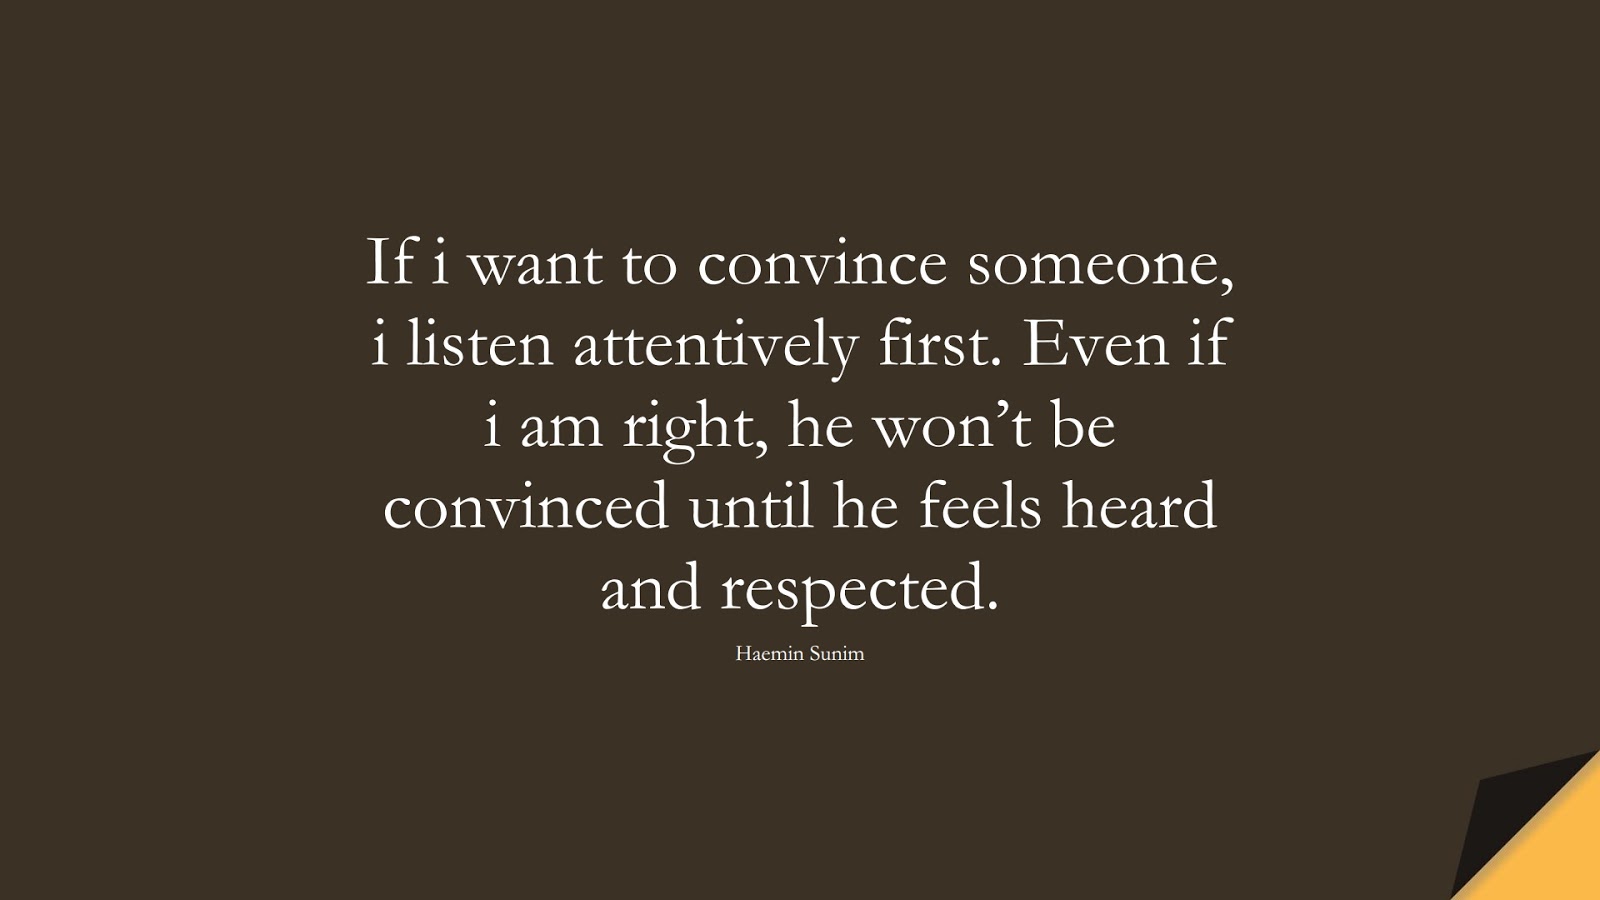 If i want to convince someone, i listen attentively first. Even if i am right, he won’t be convinced until he feels heard and respected. (Haemin Sunim);  #RelationshipQuotes